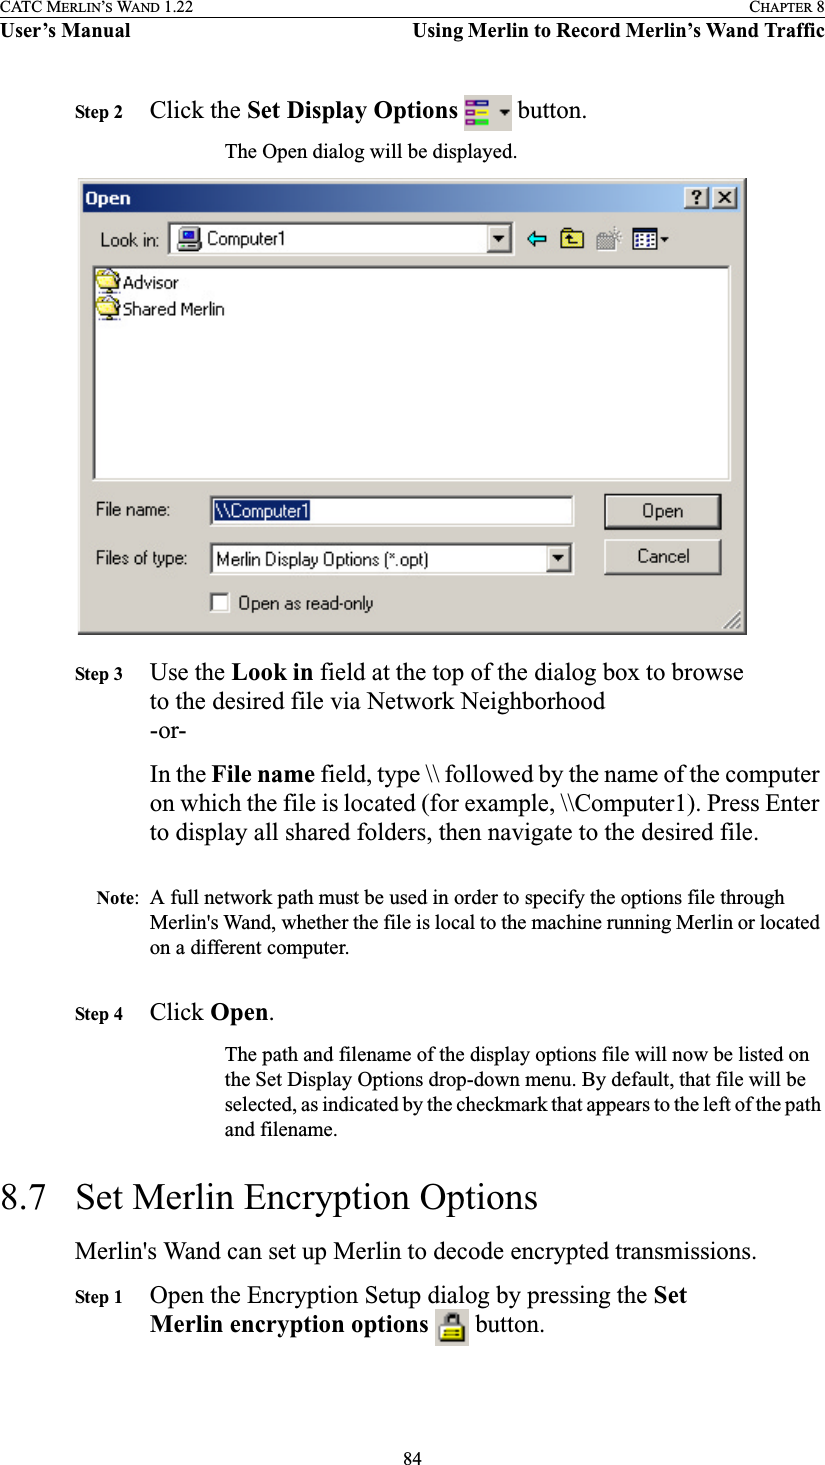 84CATC MERLIN’S WAND 1.22 CHAPTER 8User’s Manual Using Merlin to Record Merlin’s Wand TrafficStep 2 Click the Set Display Options   button.The Open dialog will be displayed.Step 3 Use the Look in field at the top of the dialog box to browse to the desired file via Network Neighborhood-or-In the File name field, type \\ followed by the name of the computer on which the file is located (for example, \\Computer1). Press Enter to display all shared folders, then navigate to the desired file.Note: A full network path must be used in order to specify the options file through Merlin&apos;s Wand, whether the file is local to the machine running Merlin or located on a different computer.Step 4 Click Open.The path and filename of the display options file will now be listed on the Set Display Options drop-down menu. By default, that file will be selected, as indicated by the checkmark that appears to the left of the path and filename.8.7 Set Merlin Encryption OptionsMerlin&apos;s Wand can set up Merlin to decode encrypted transmissions.Step 1 Open the Encryption Setup dialog by pressing the Set Merlin encryption options   button.